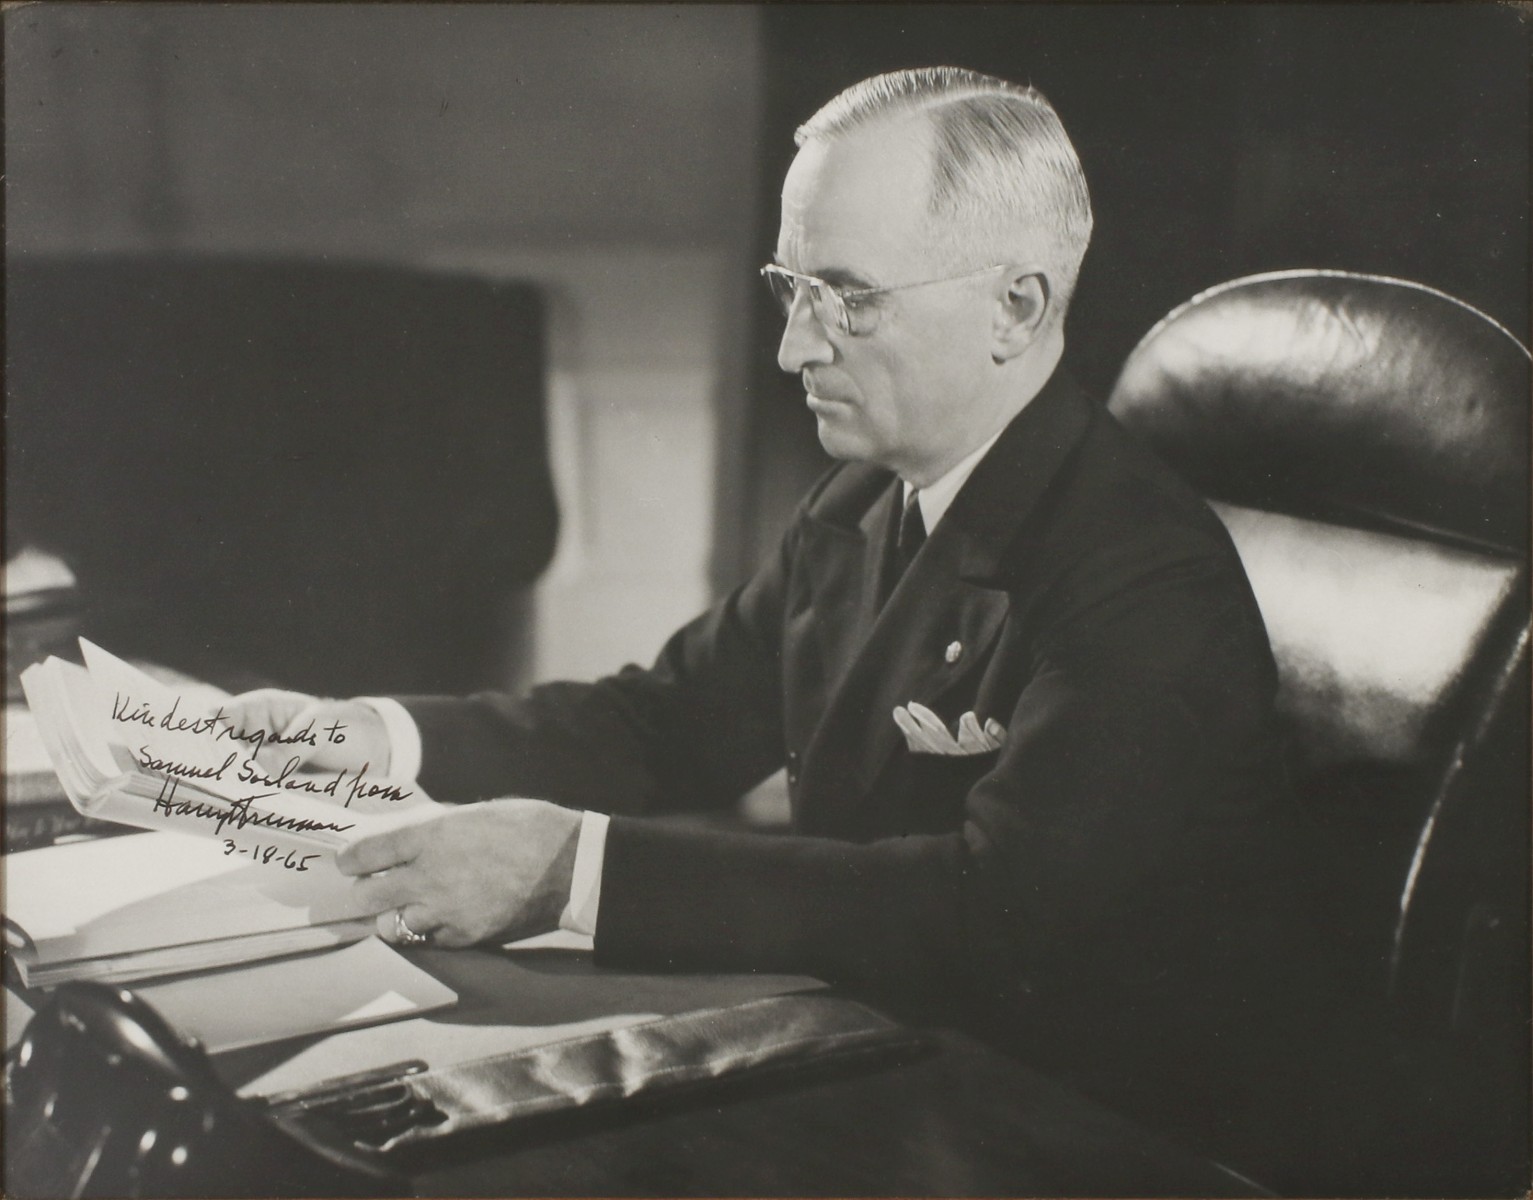 INSCRIBED SIGNED PHOTO OF HARRY S. TRUMAN (1884-1972)